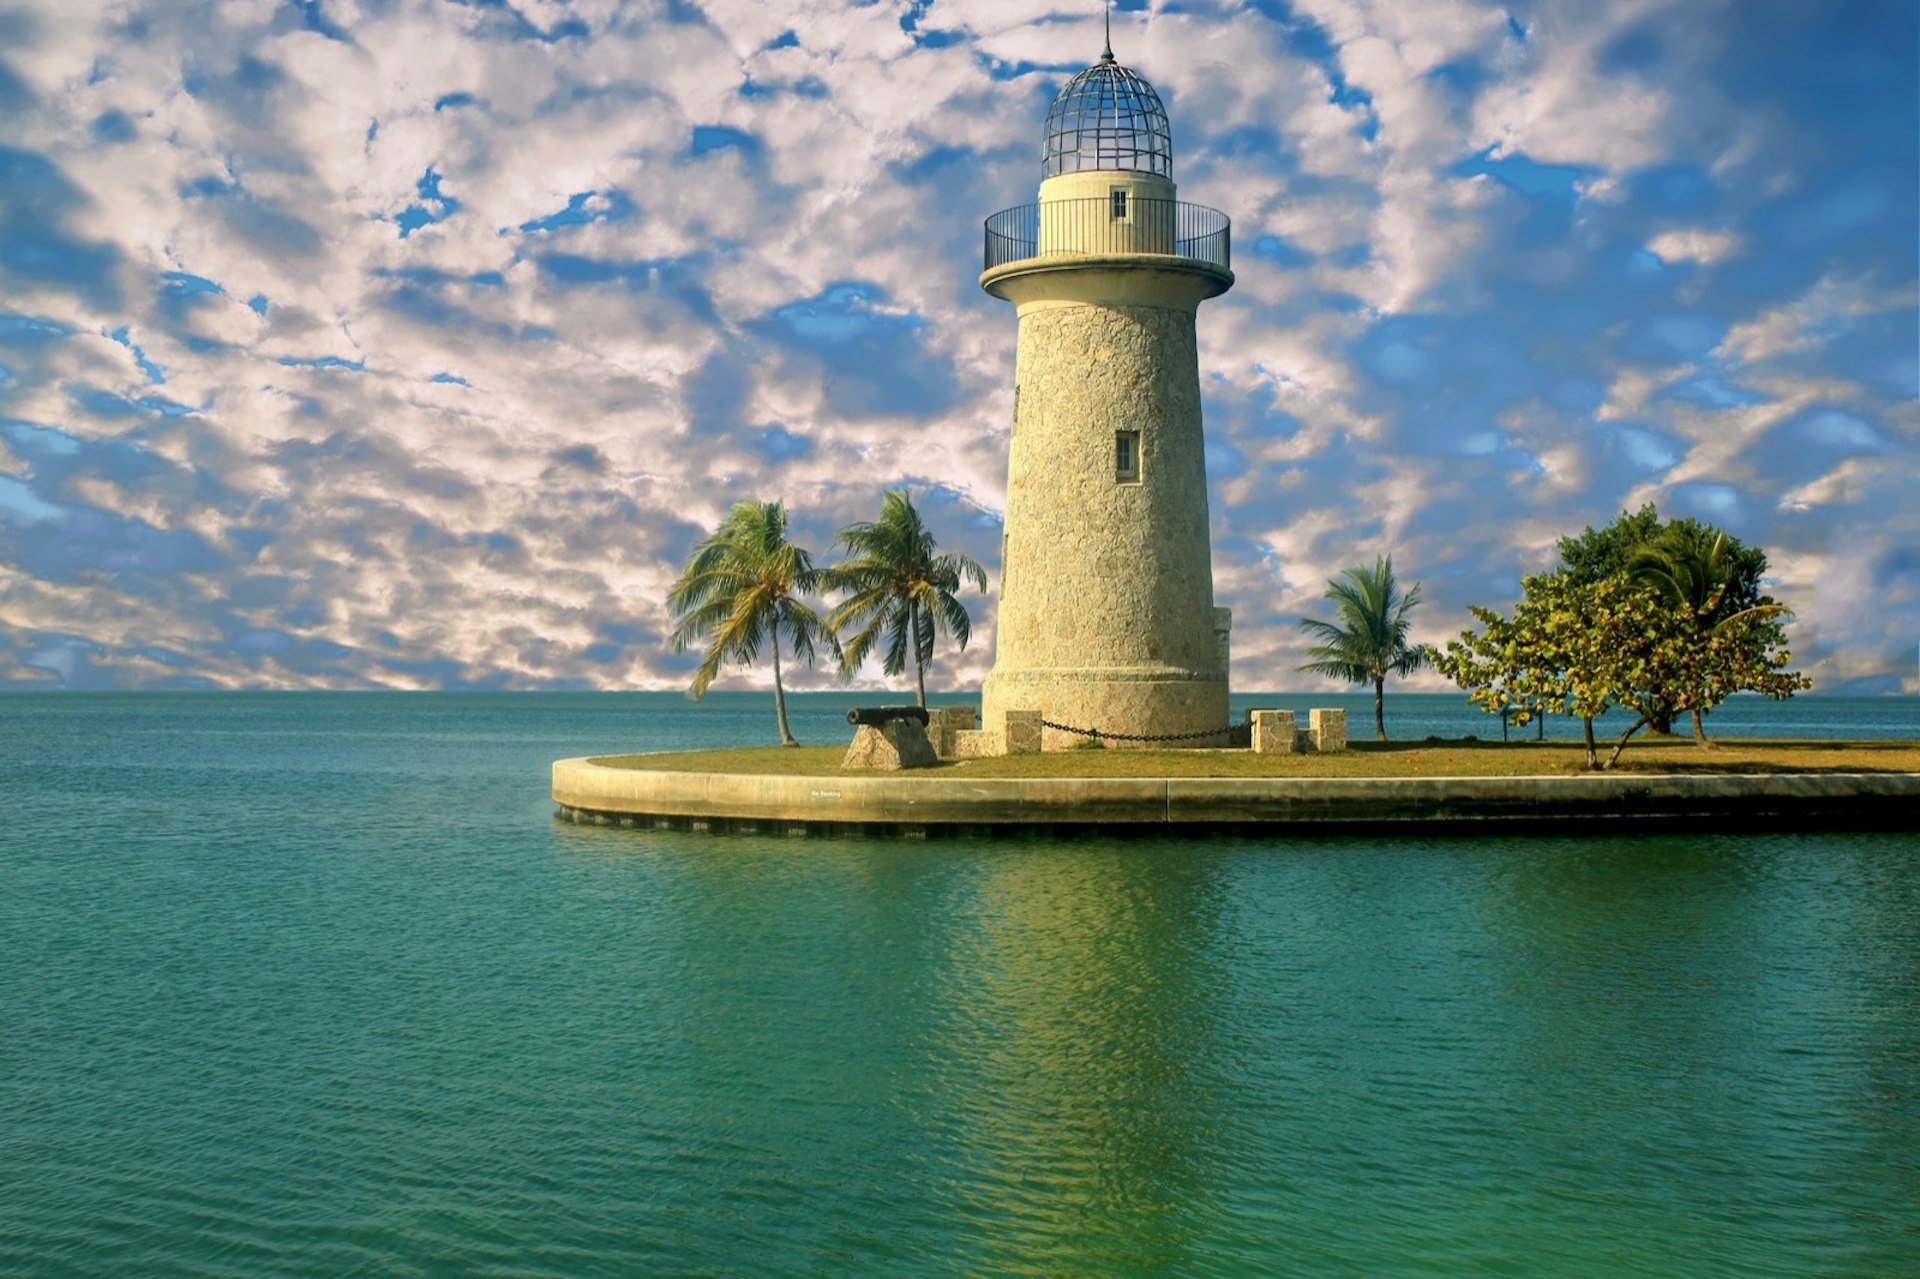 A conical lighthouse, with a few palm trees around its base, is framed by a cloud-filled sky on its spit of land jutting into a calm bay